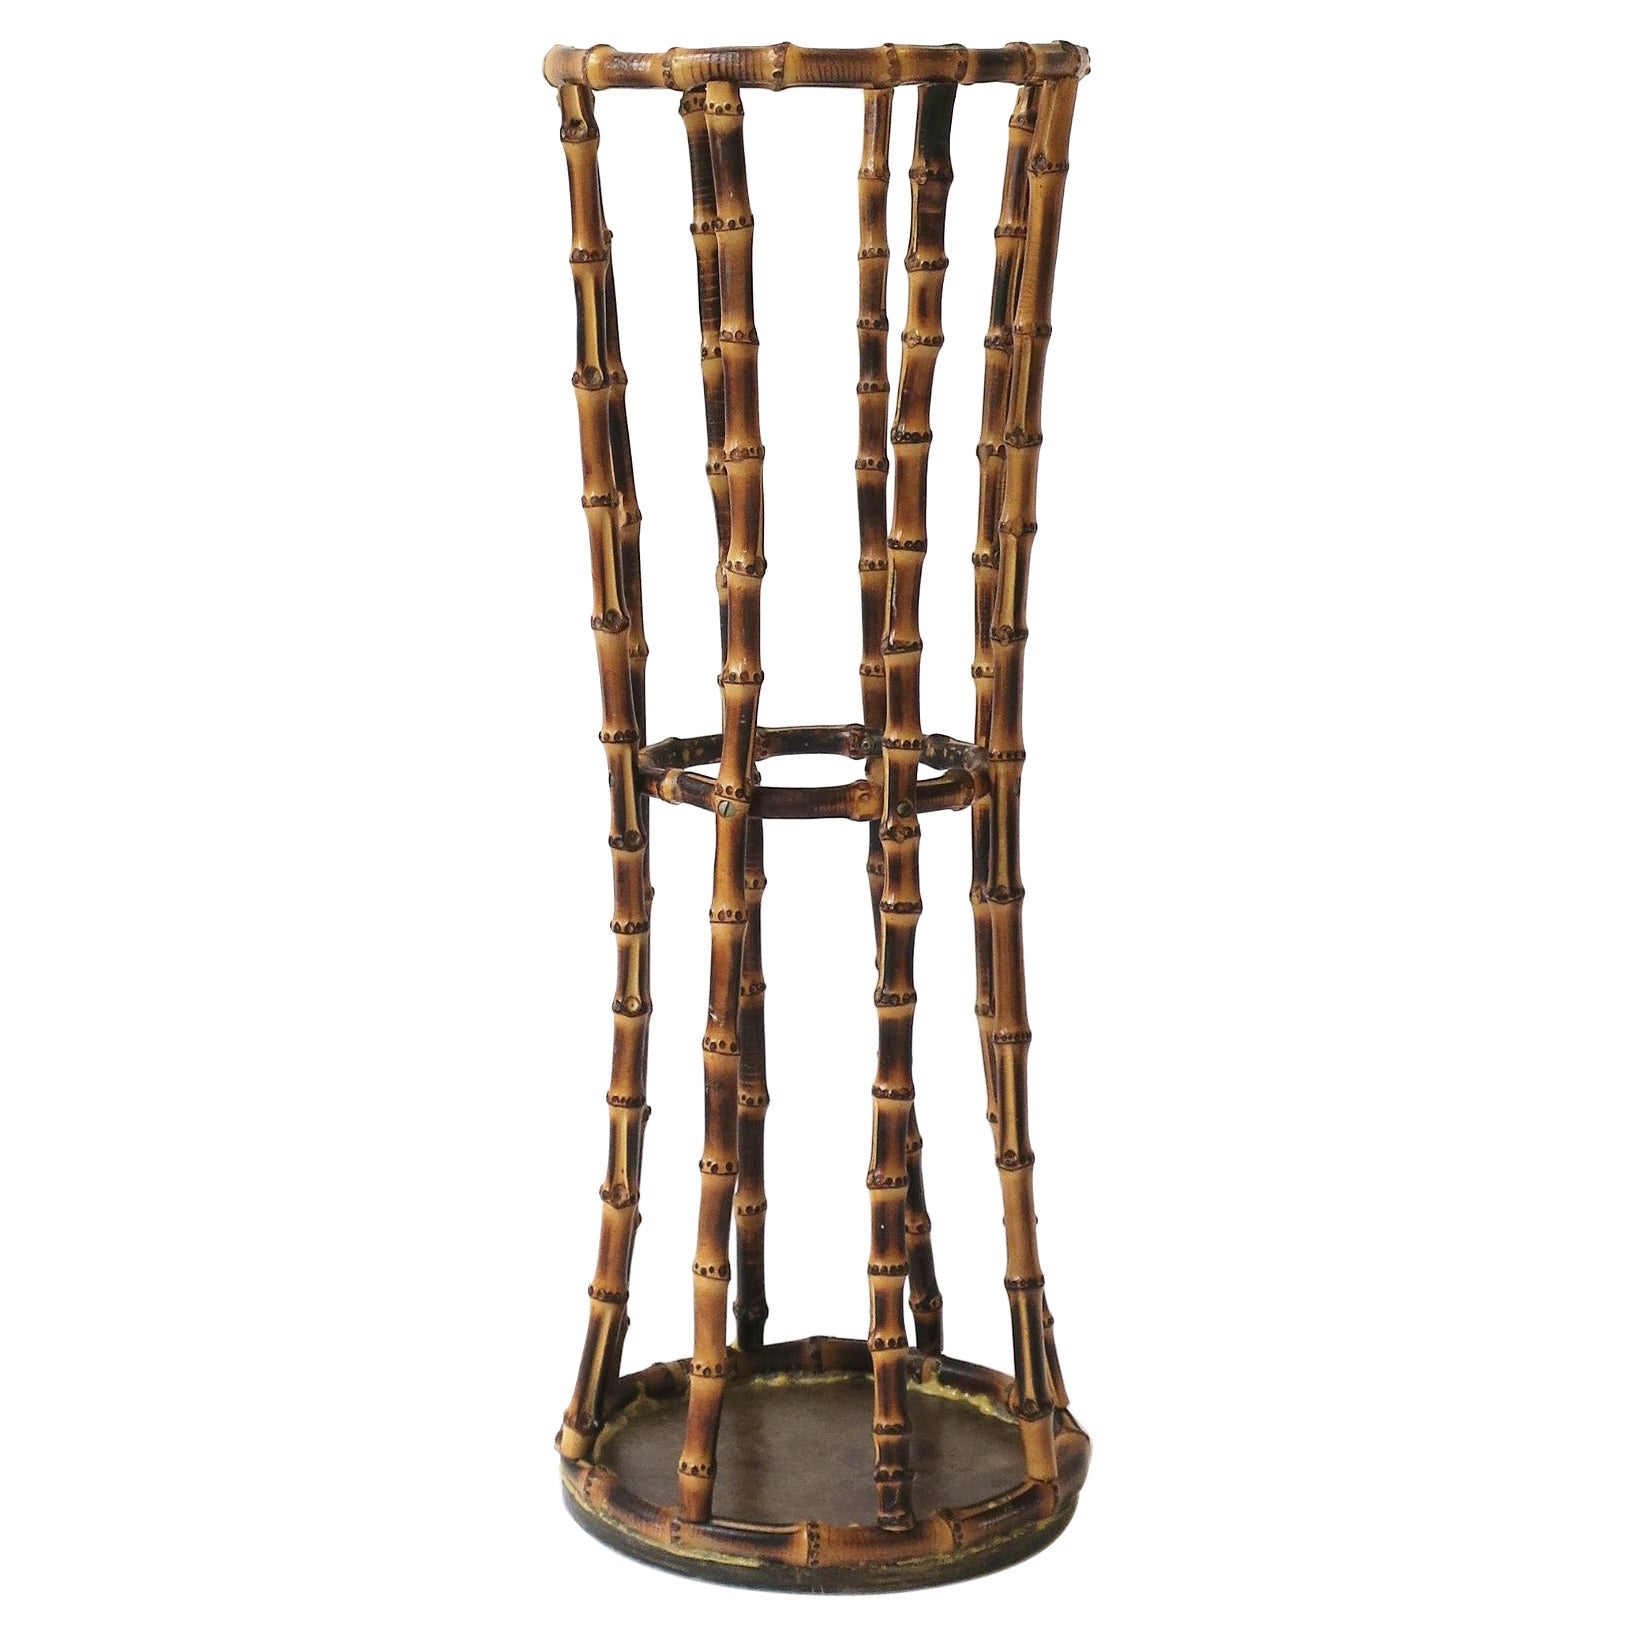 Bamboo Umbrella Holder Stand in the style of Gucci